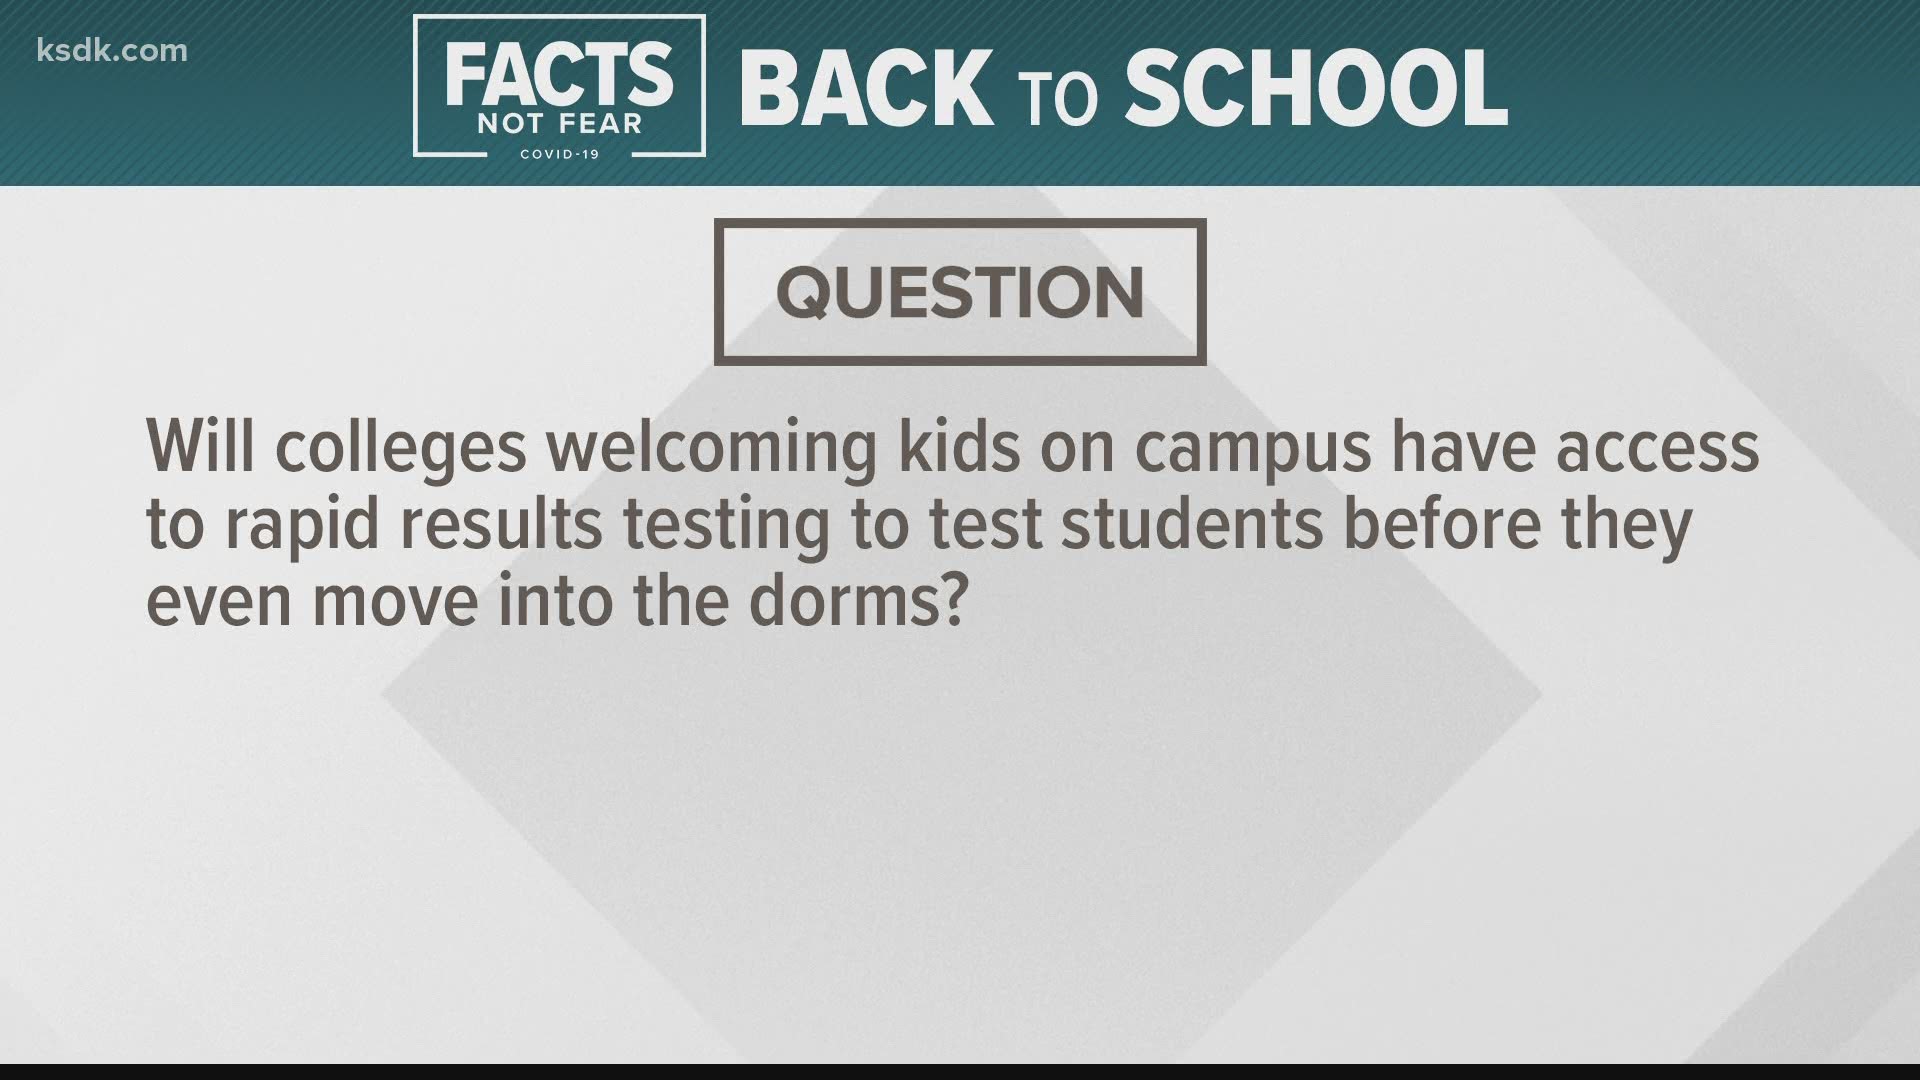 We're partnering with education experts to answer your back-to-school questions.